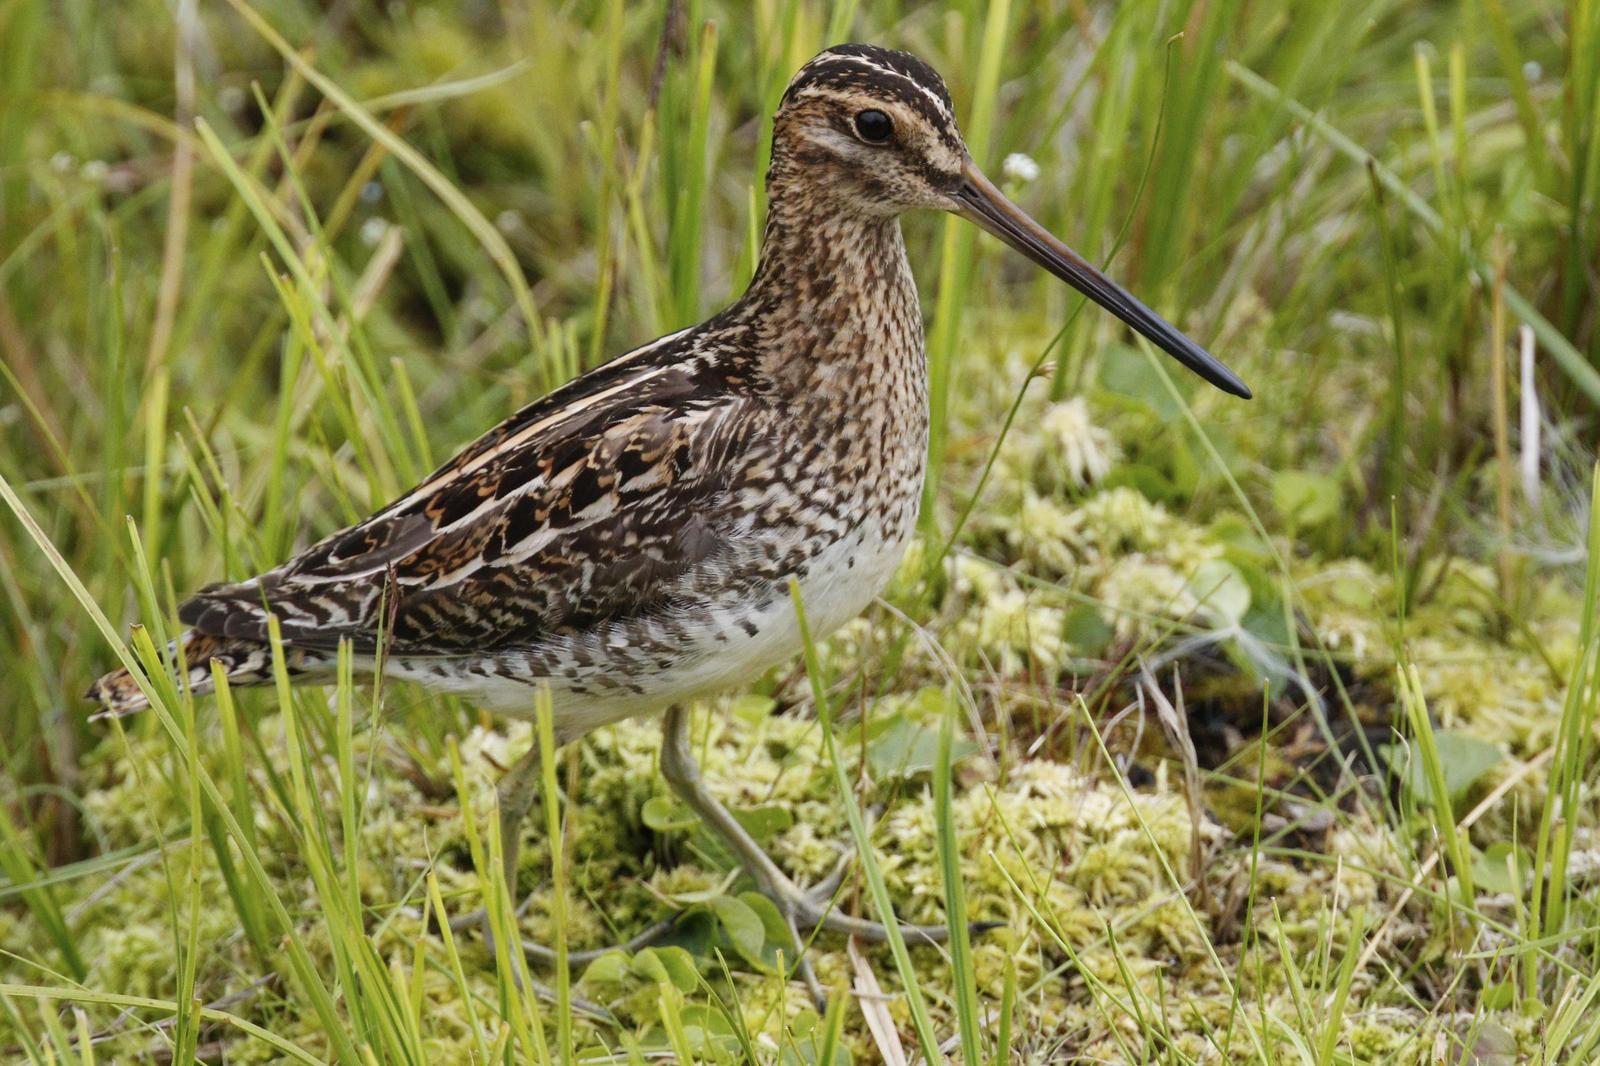 Common Snipe Photo by Emily Willoughby